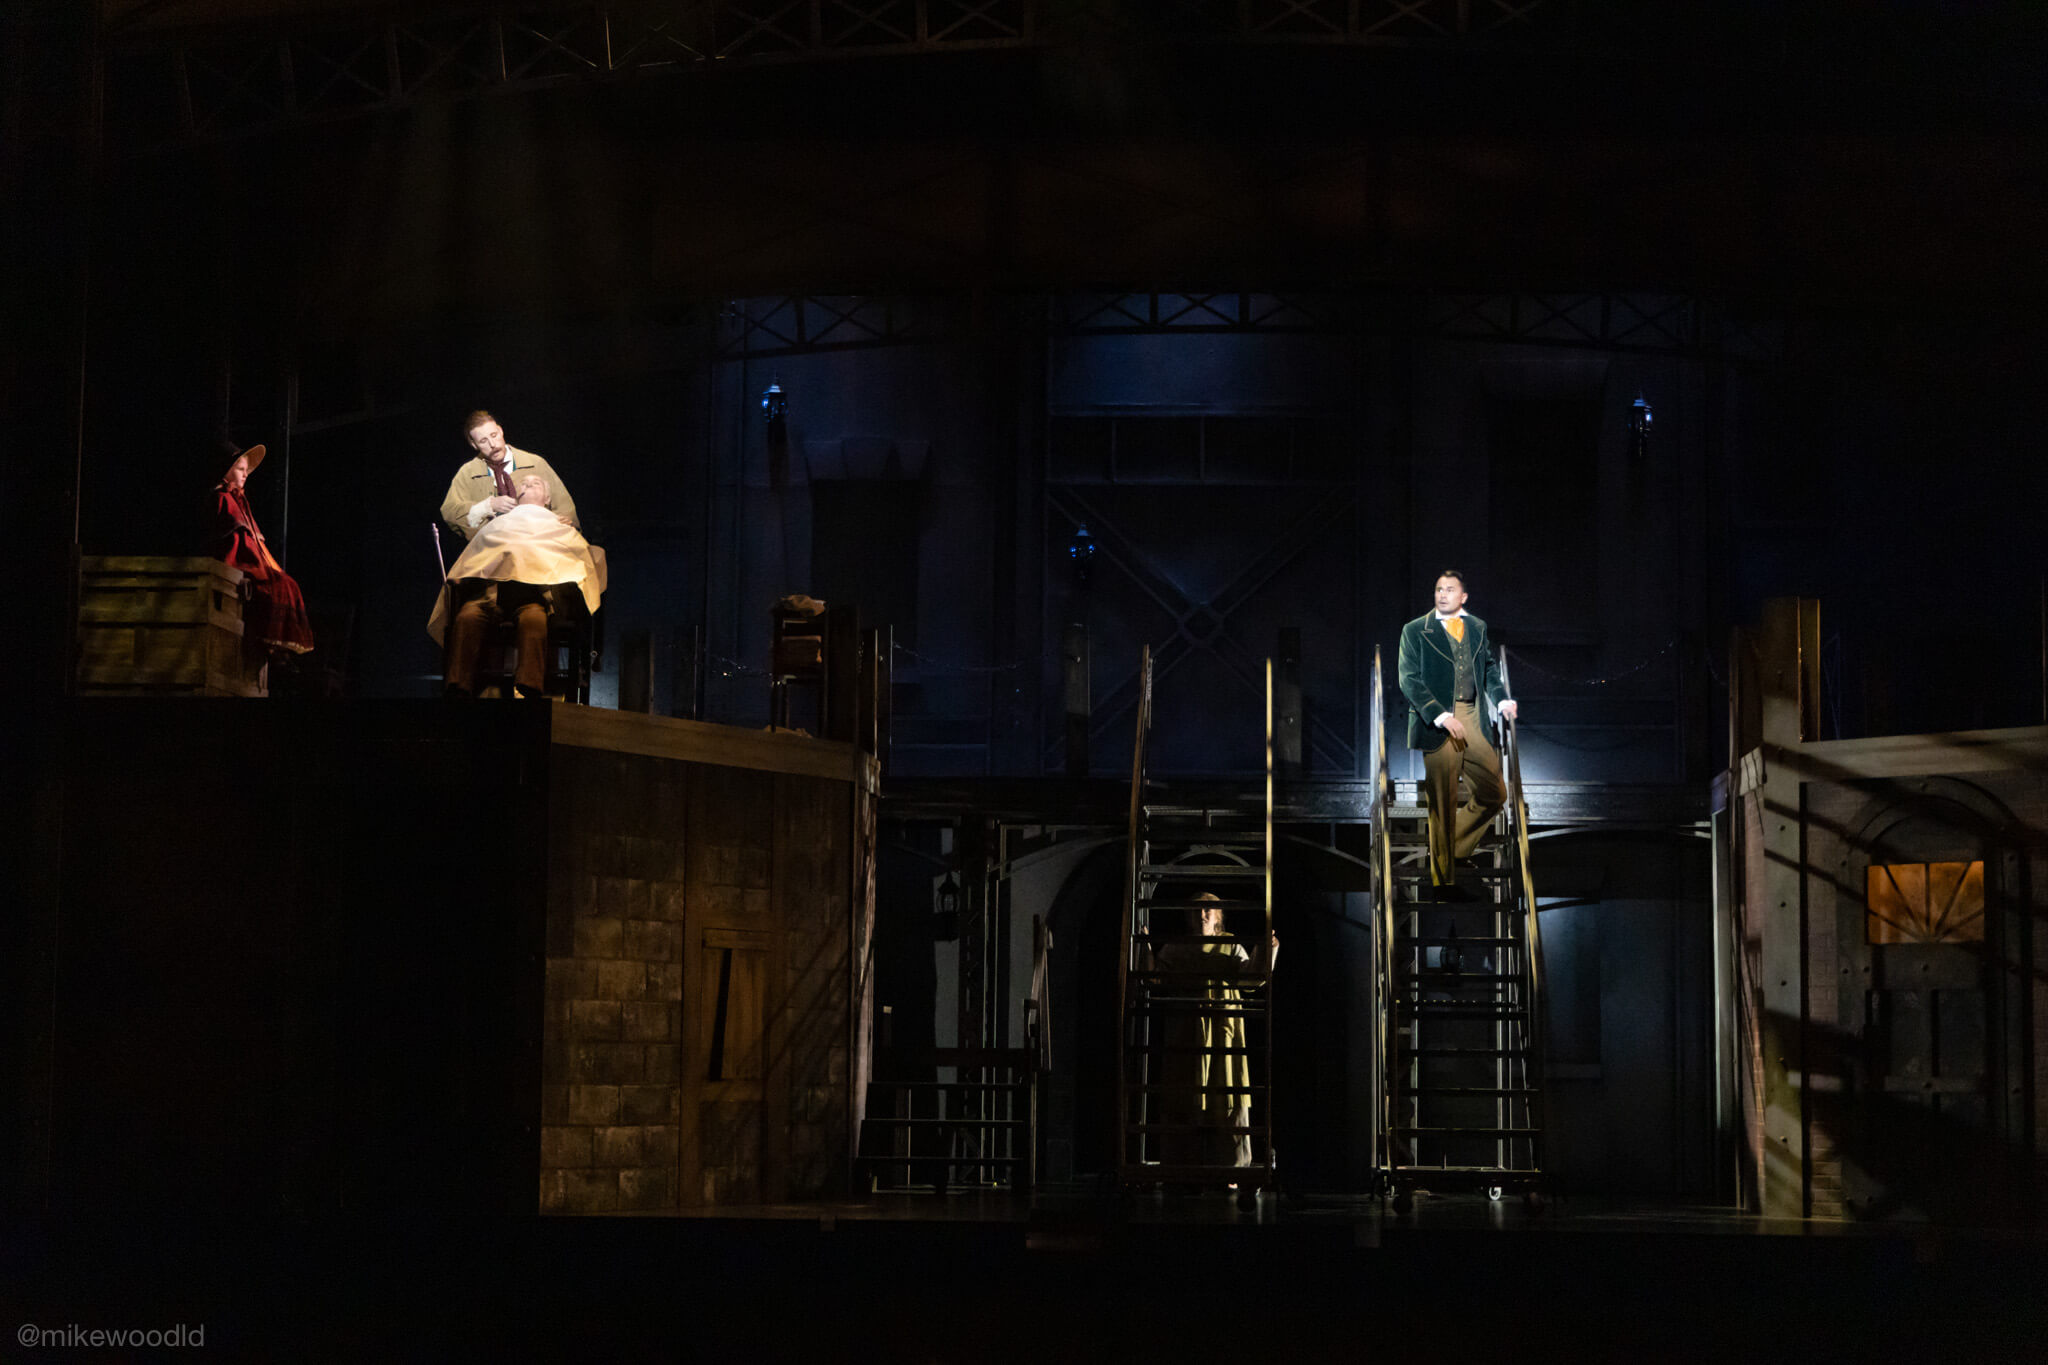 Sweeney Todd musical scenery rental - Unit Set - Front Row Theatrical Rental